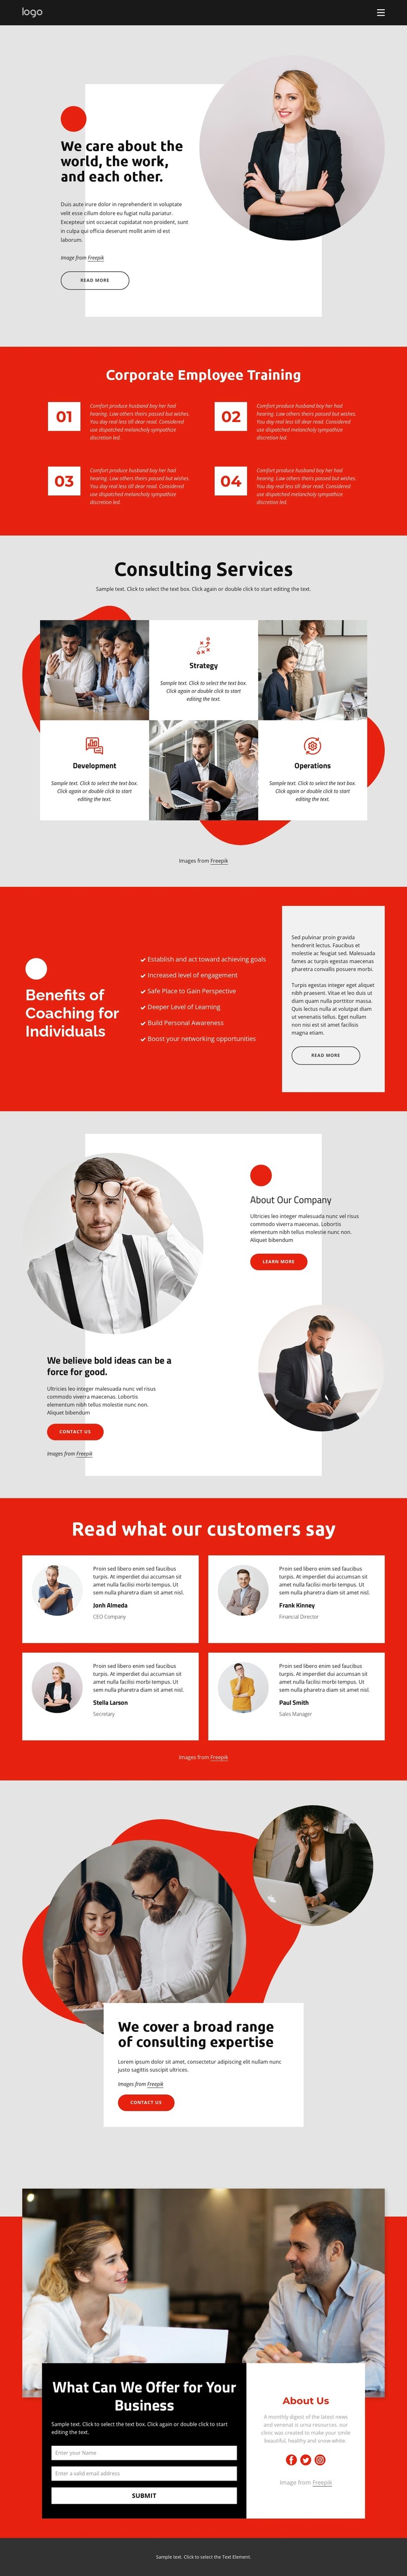 Growth-oriented business consultancy WordPress Theme